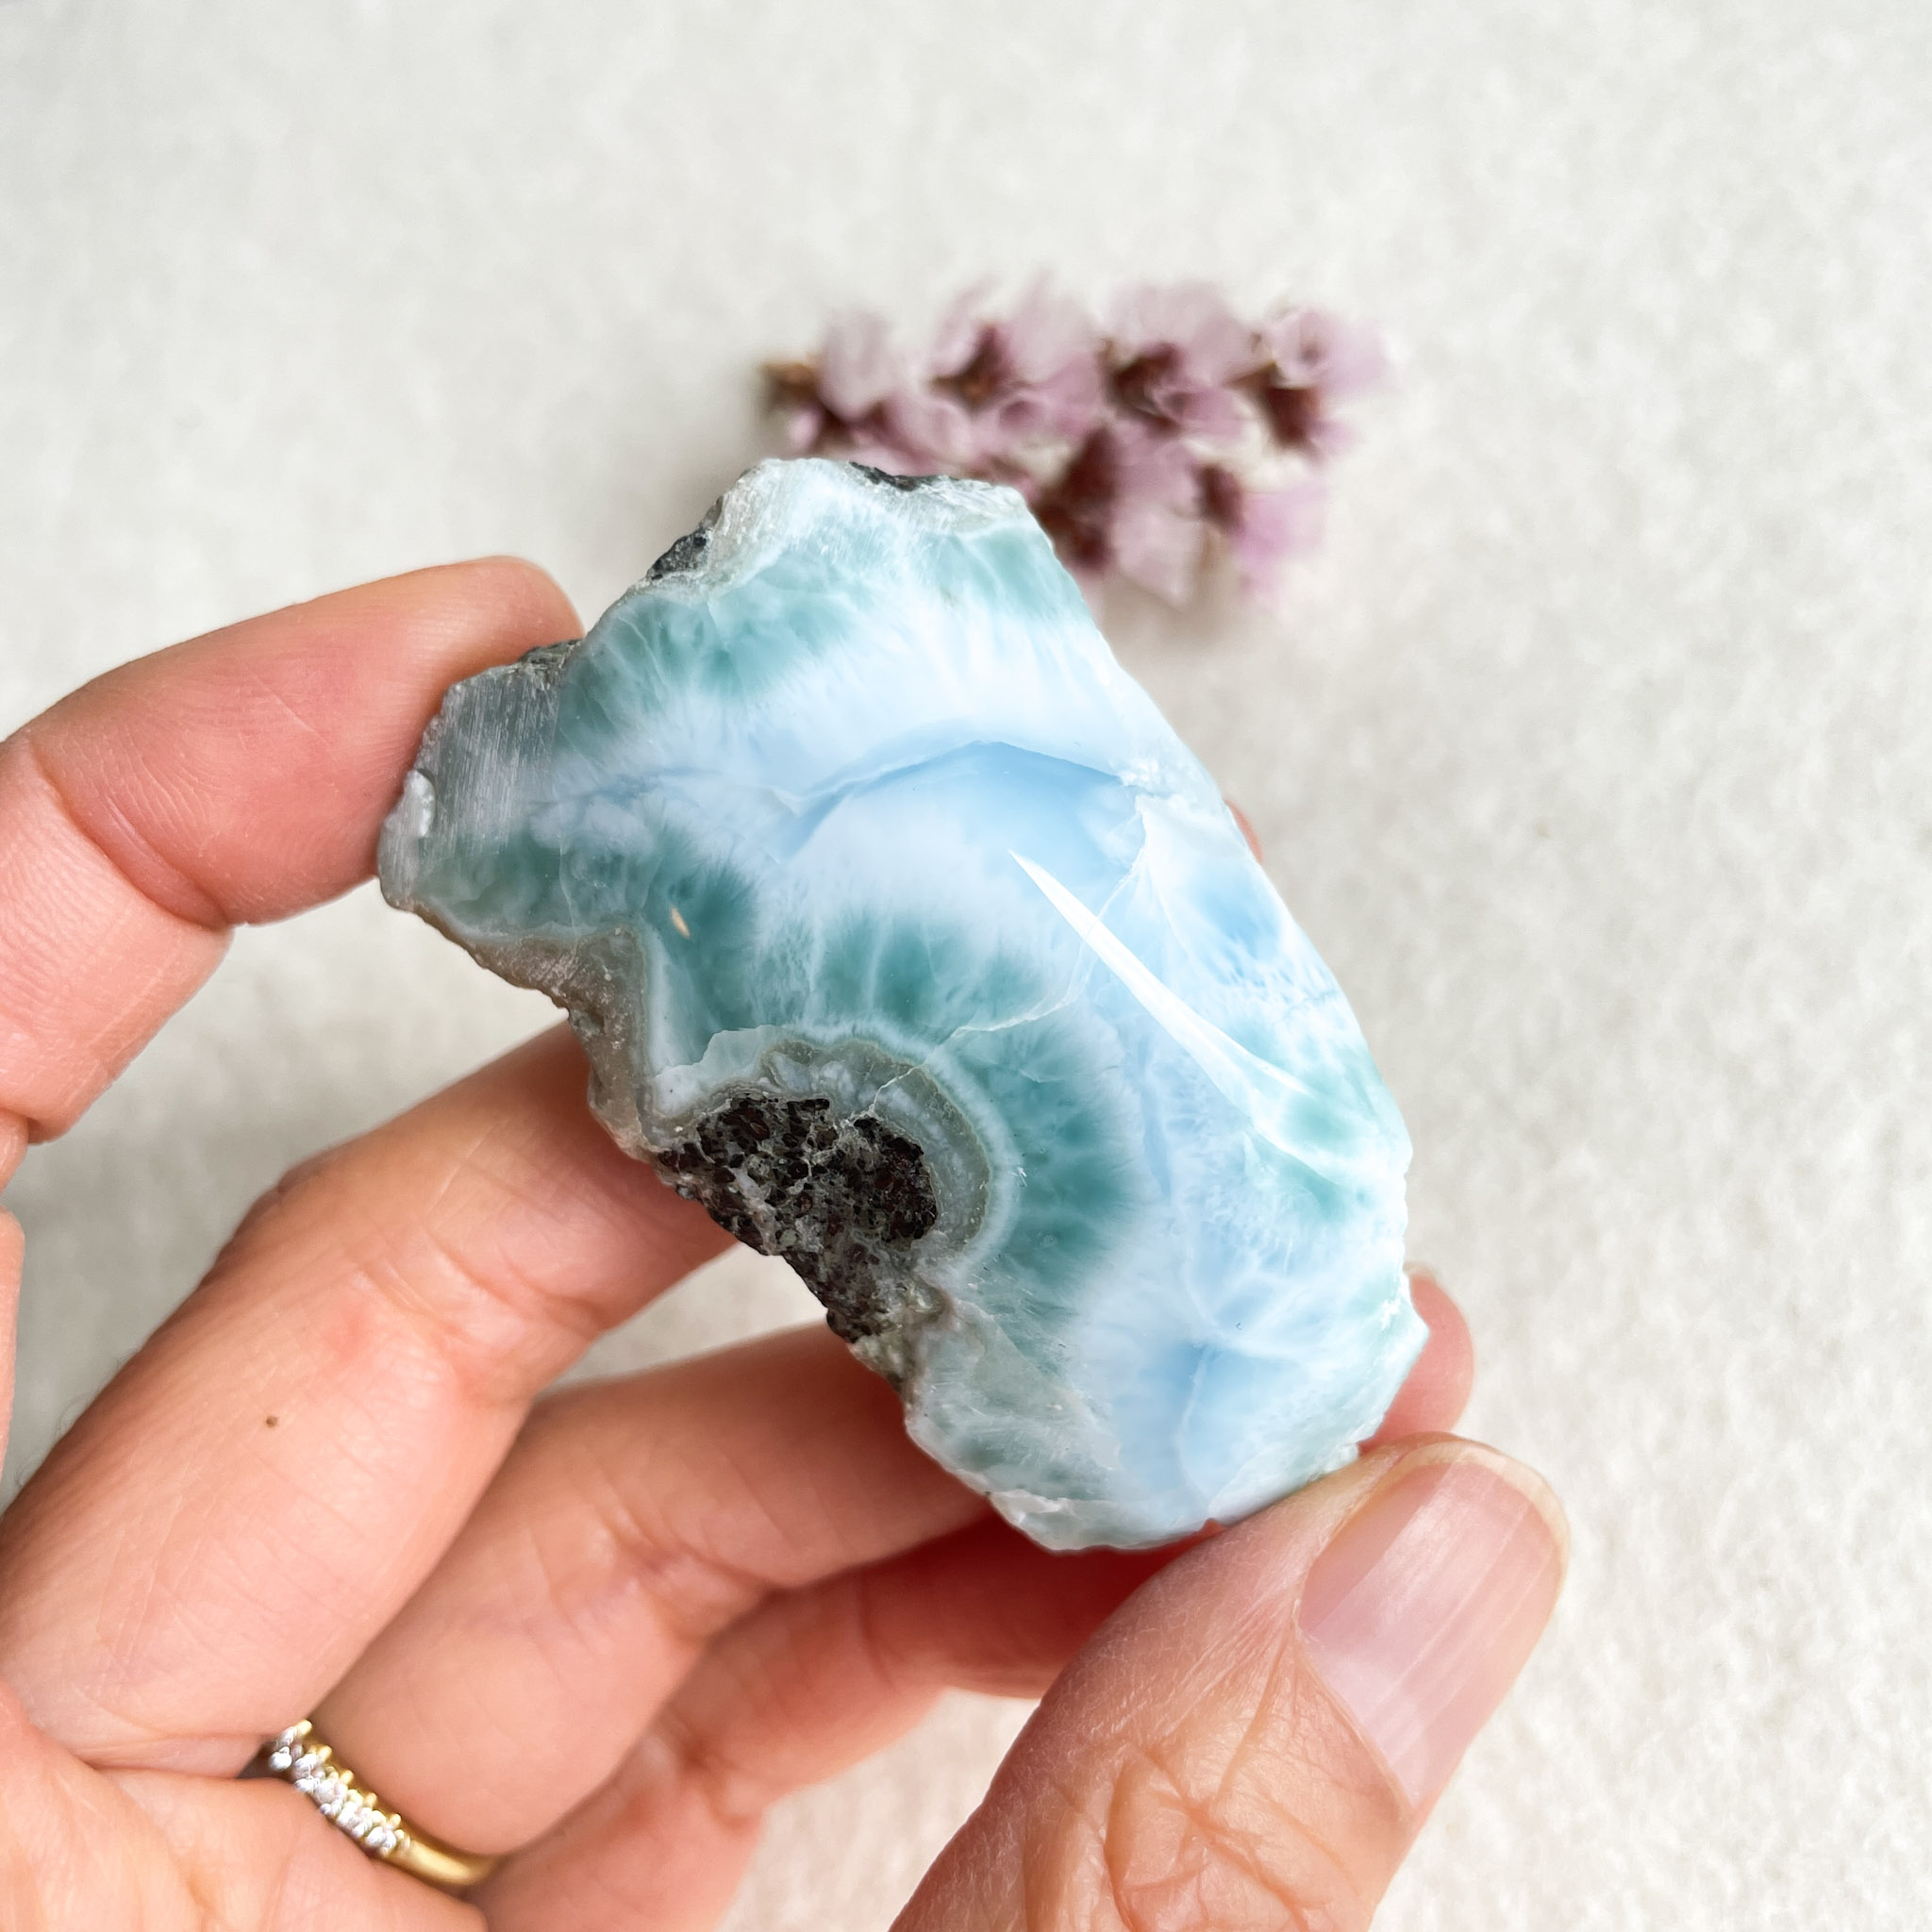 A person holds a polished blue and white agate stone with a crystalline center and rough edges, with small dried flowers in the background.